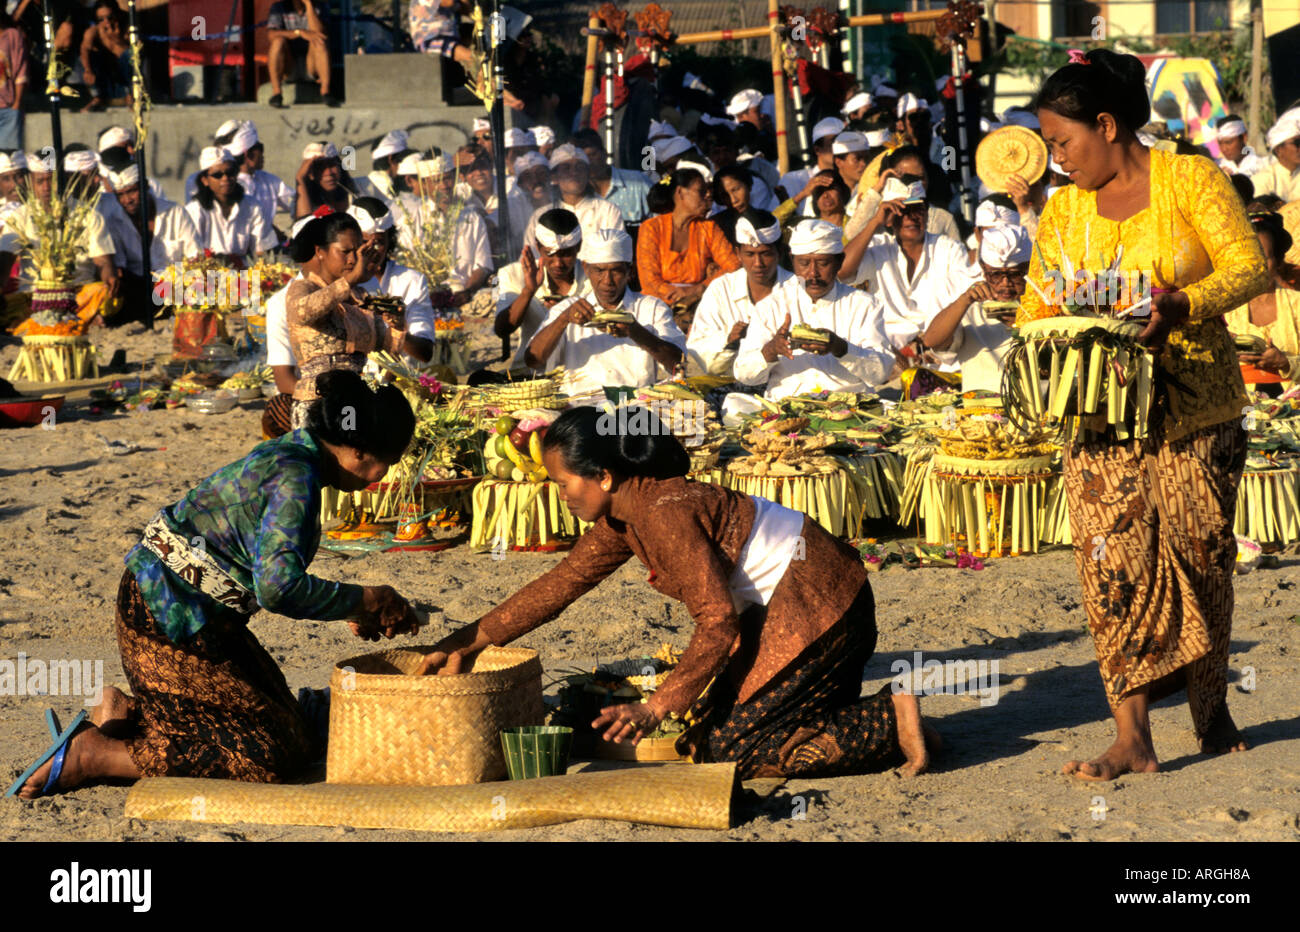 Kuta Beach, Ceremony Bali funereal cremation Balinese funeral procession, faith offering, Hindu universe, crowd, group, people, men, women, Indonesia, Stock Photo